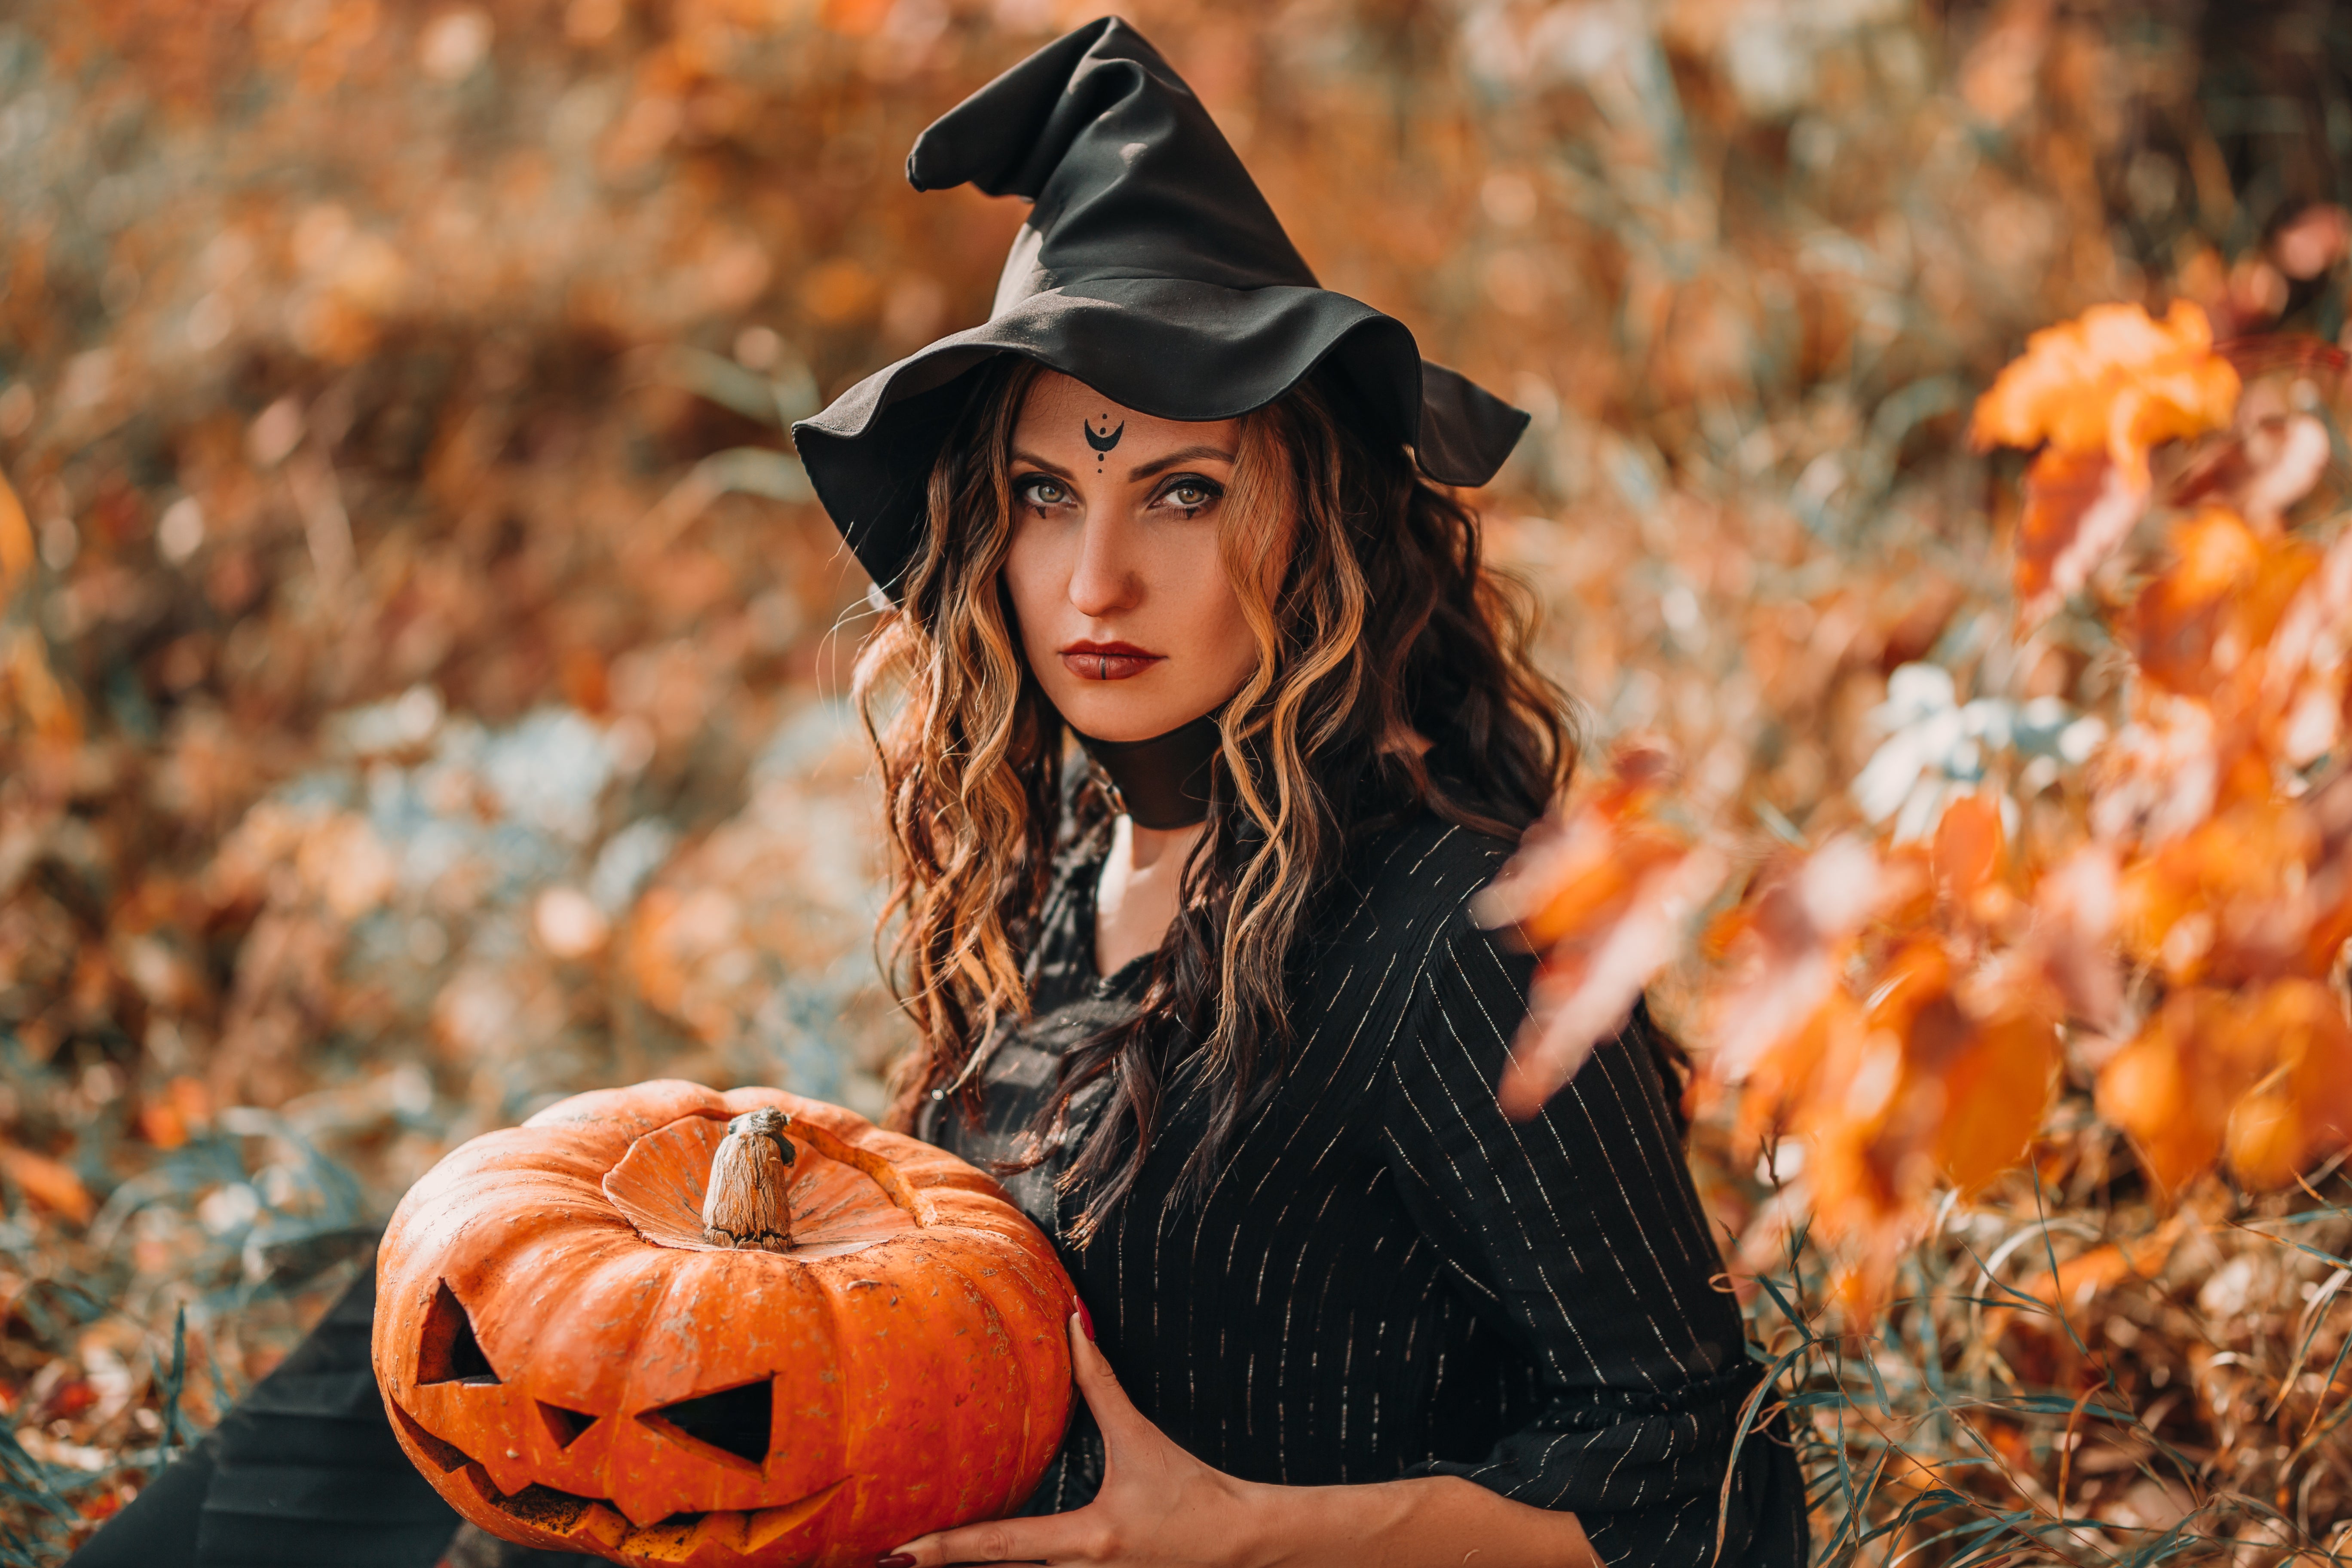 sitting-girl-dressed-as-witch-holding-pumpkin-in-t-2021-09-03-02-30-09-utc - Azoroh